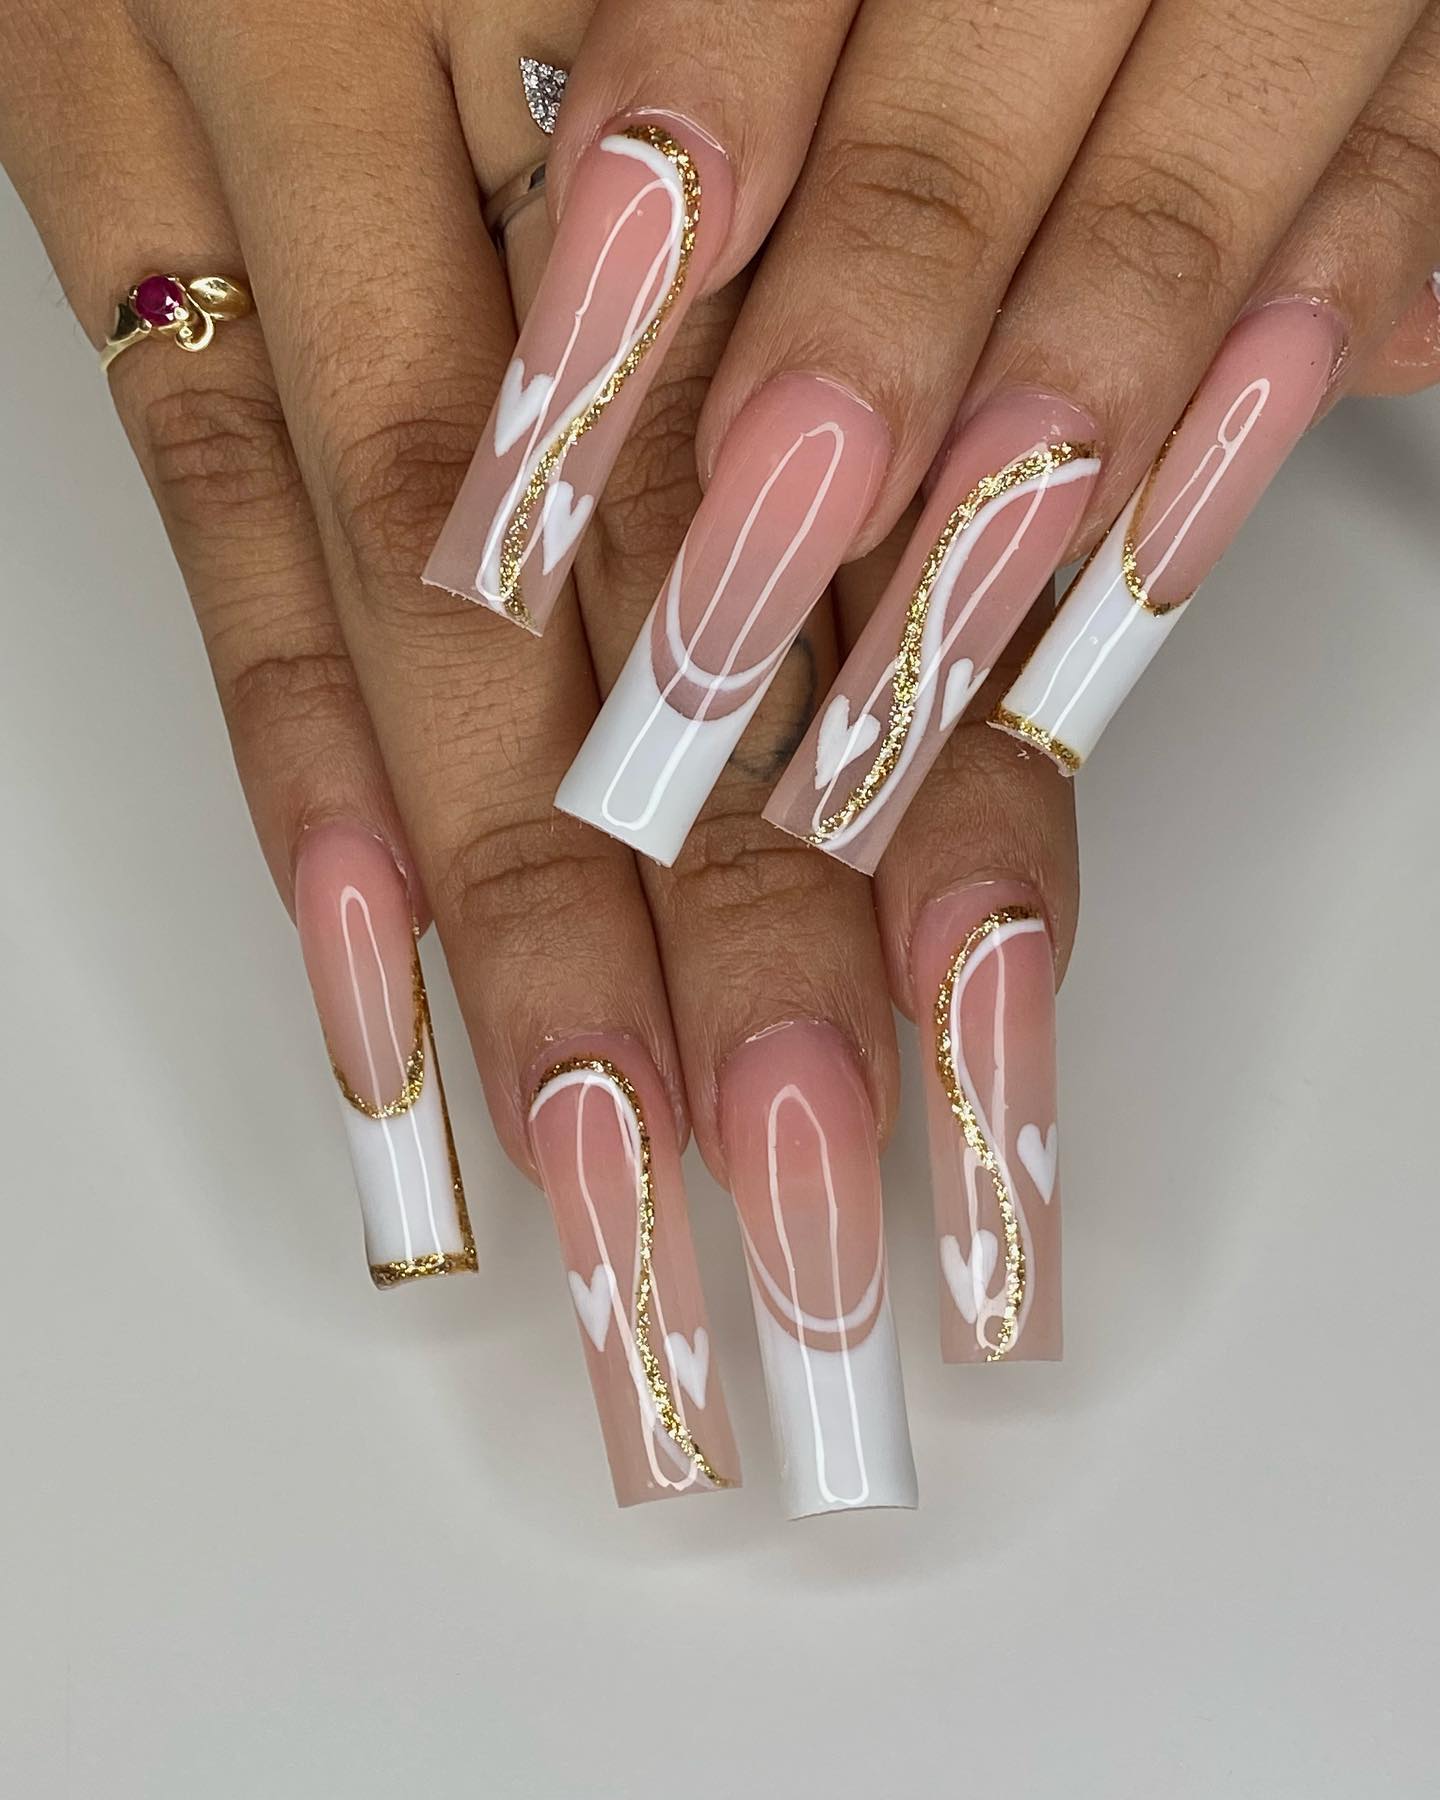 We have to say that having this length of nails can be something hard for a wedding way but if you say that you can handle it, why not trying? Golden glitters are ready to enrich your whole nail art, so let's have swirls with it.